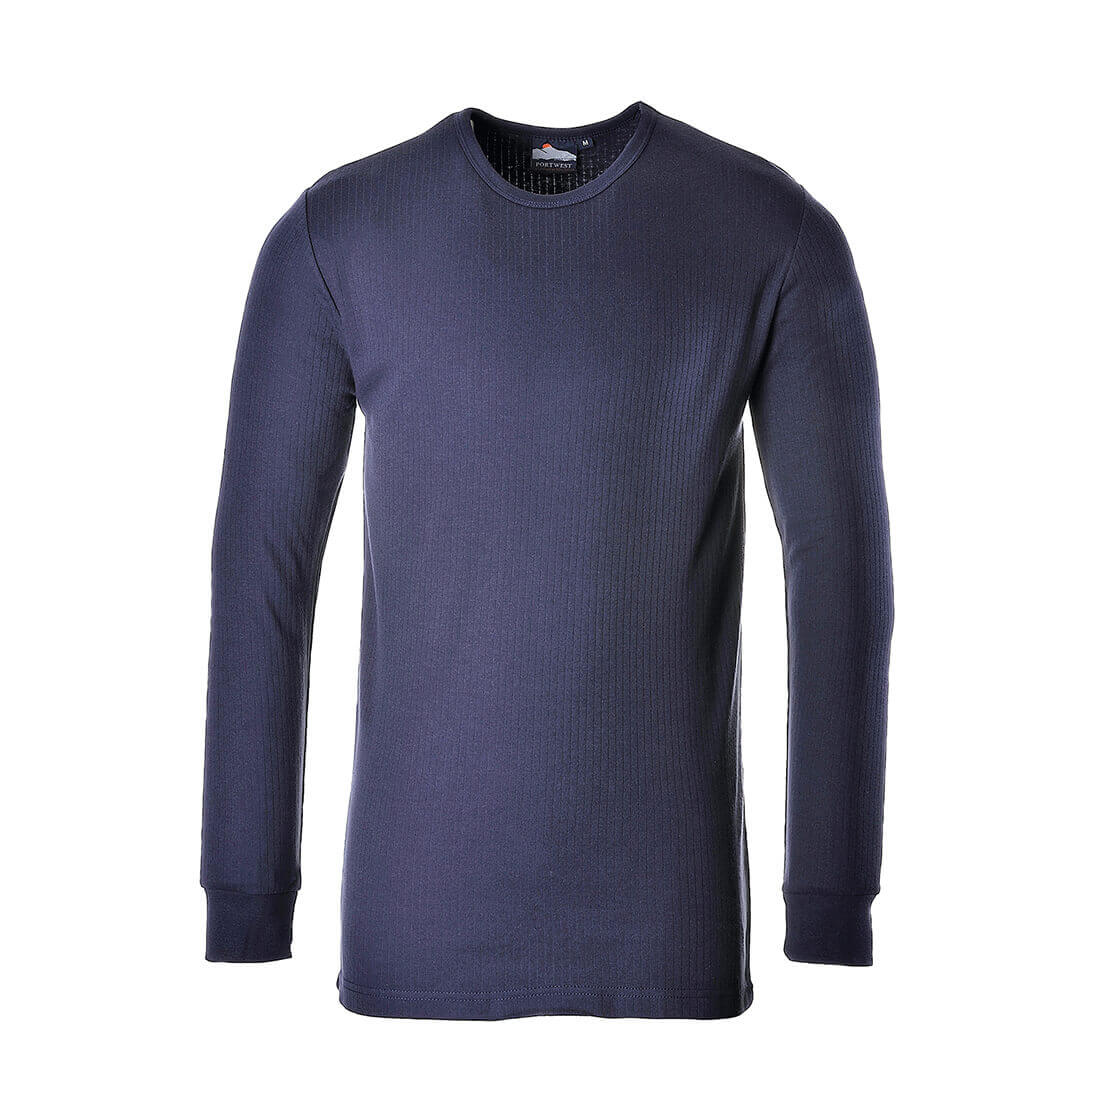 Image of Portwest Thermal Long Sleeve T Shirt Navy S